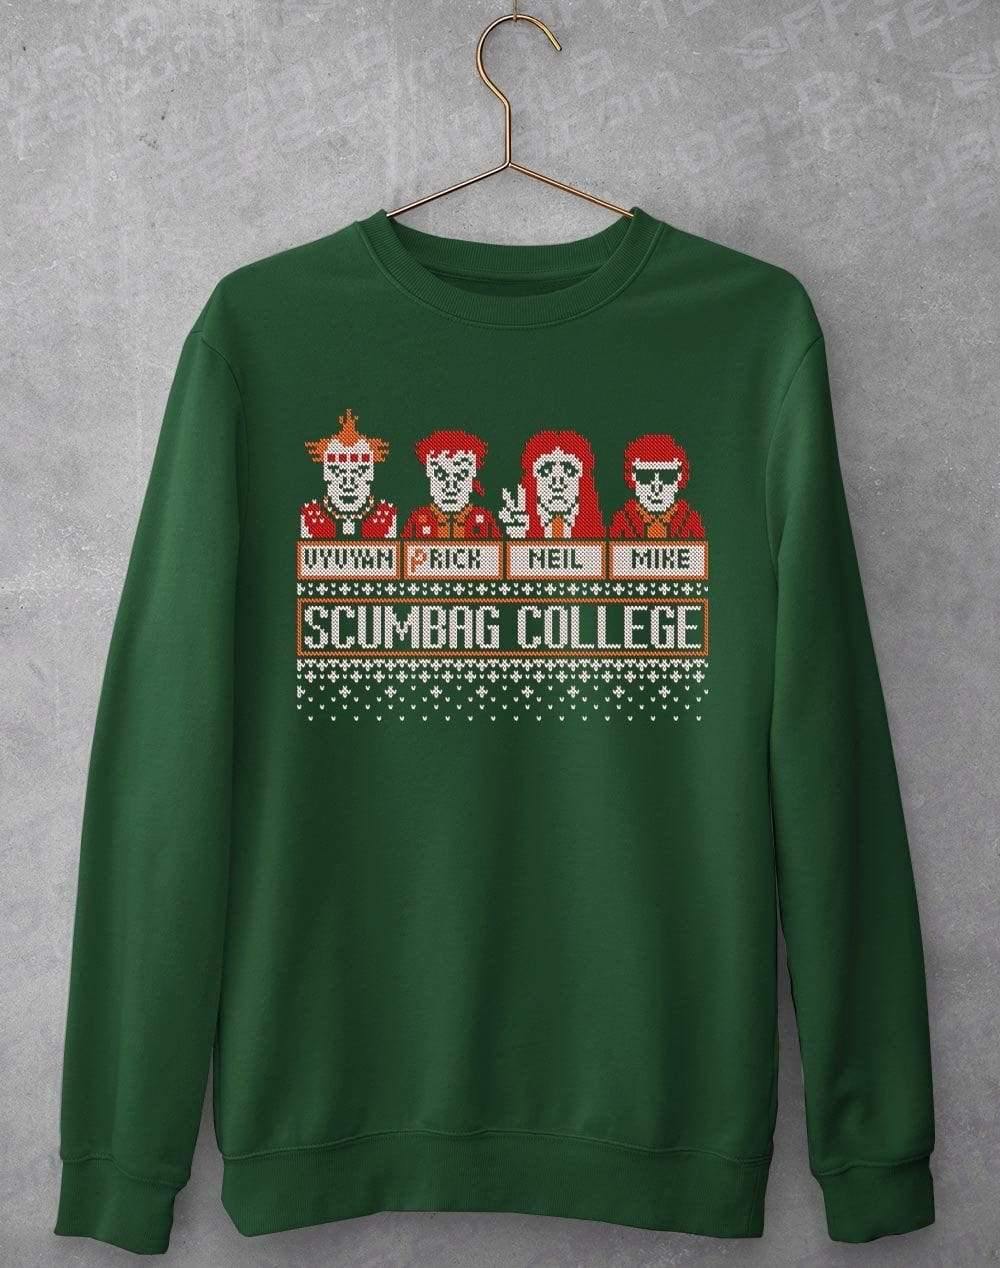 Scumbag College Festive Knitted-Look Sweatshirt XS / Bottle Green  - Off World Tees